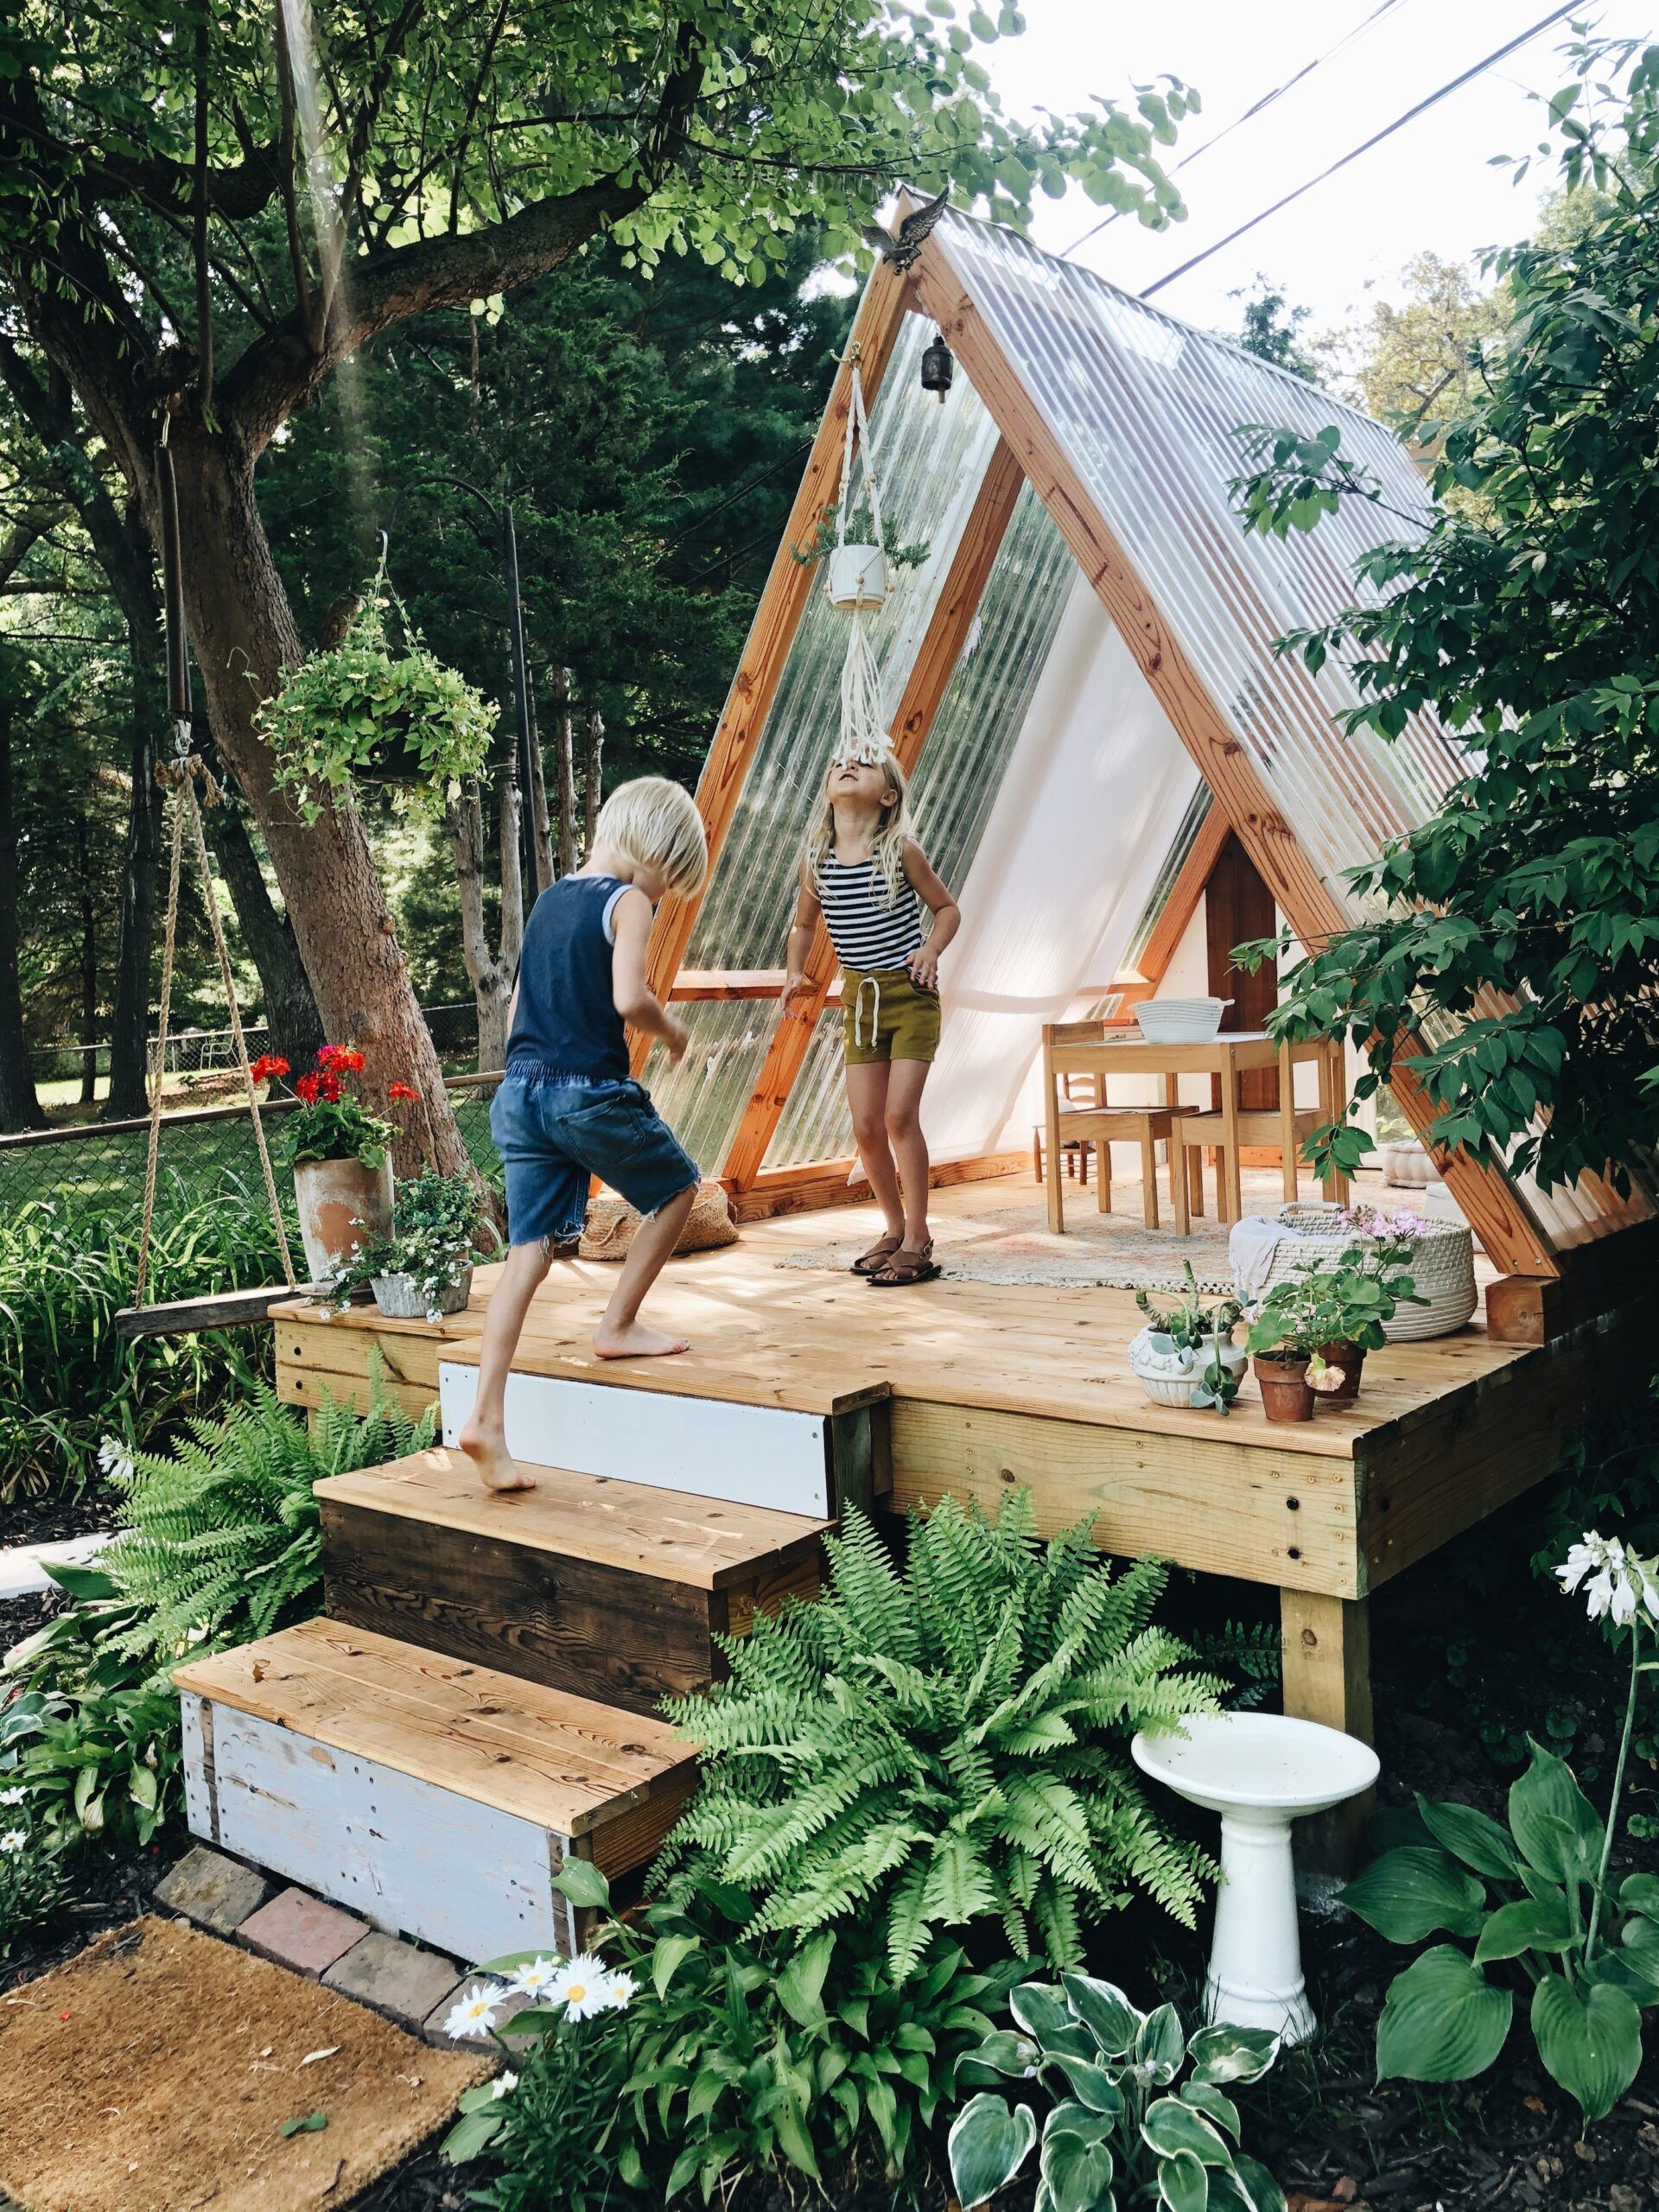 Creative Backyard Bliss: Fun and Imaginative Ideas for Your Outdoor Space